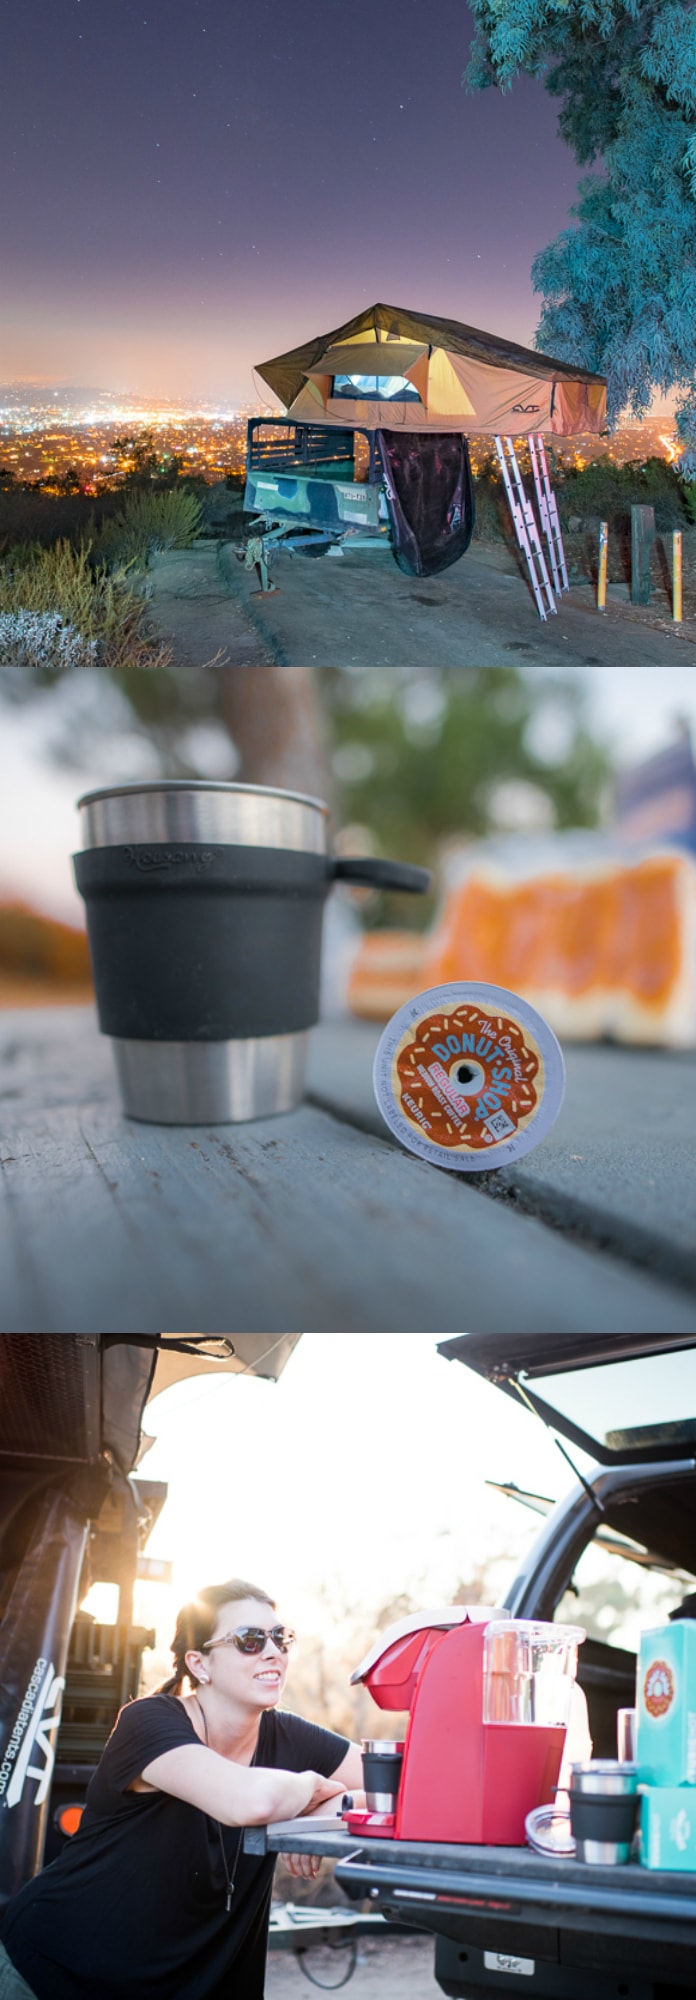 Camping with a Keurig? Here's how it's done!